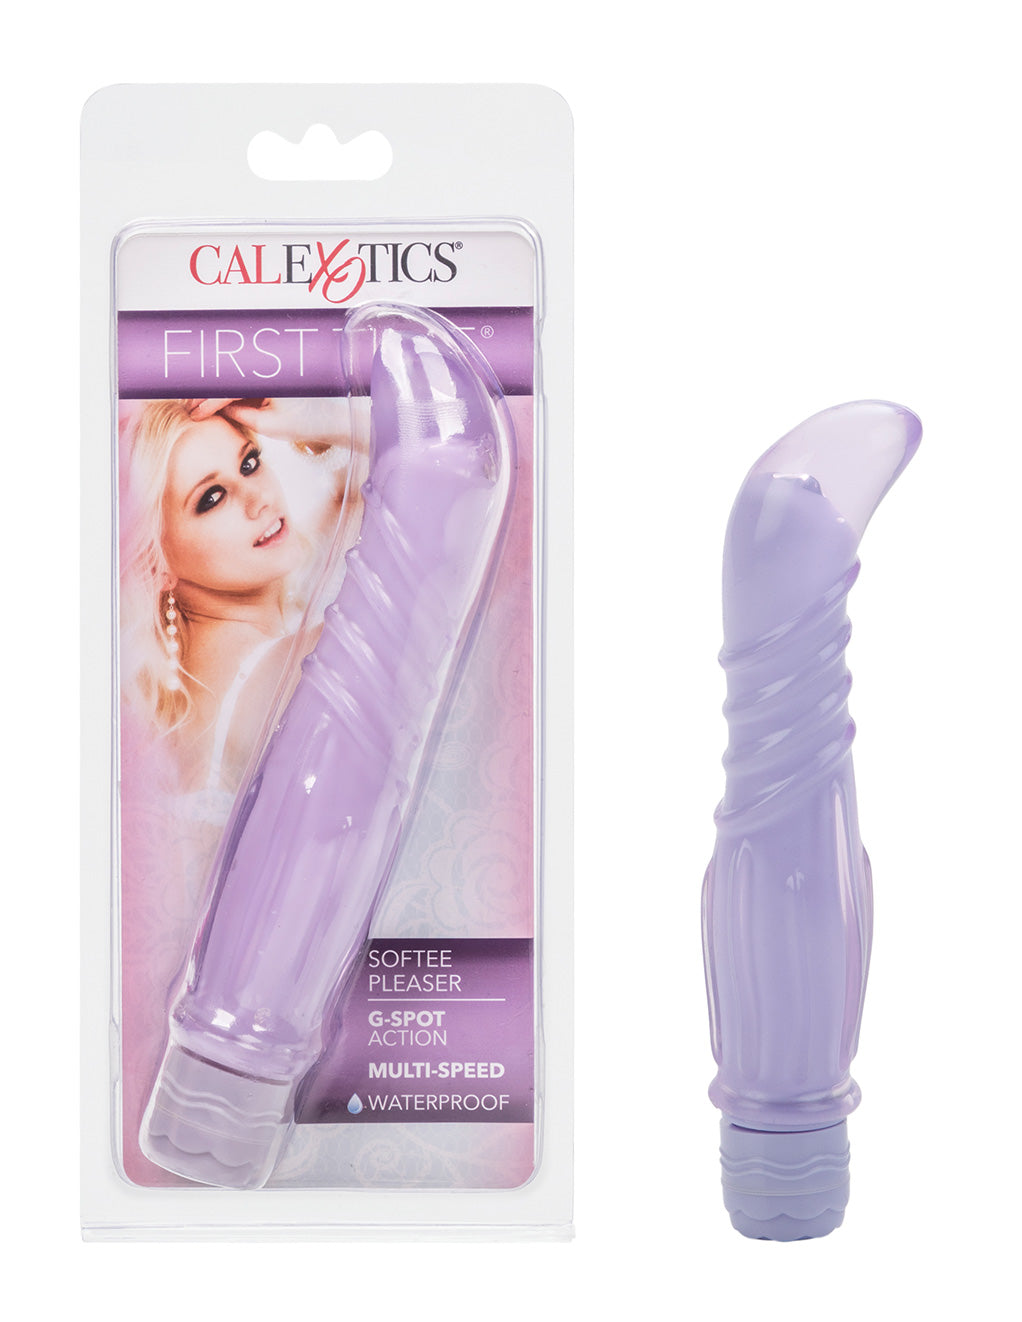 First Time Softee Pleaser G-spot Vibrator- Purple- Package